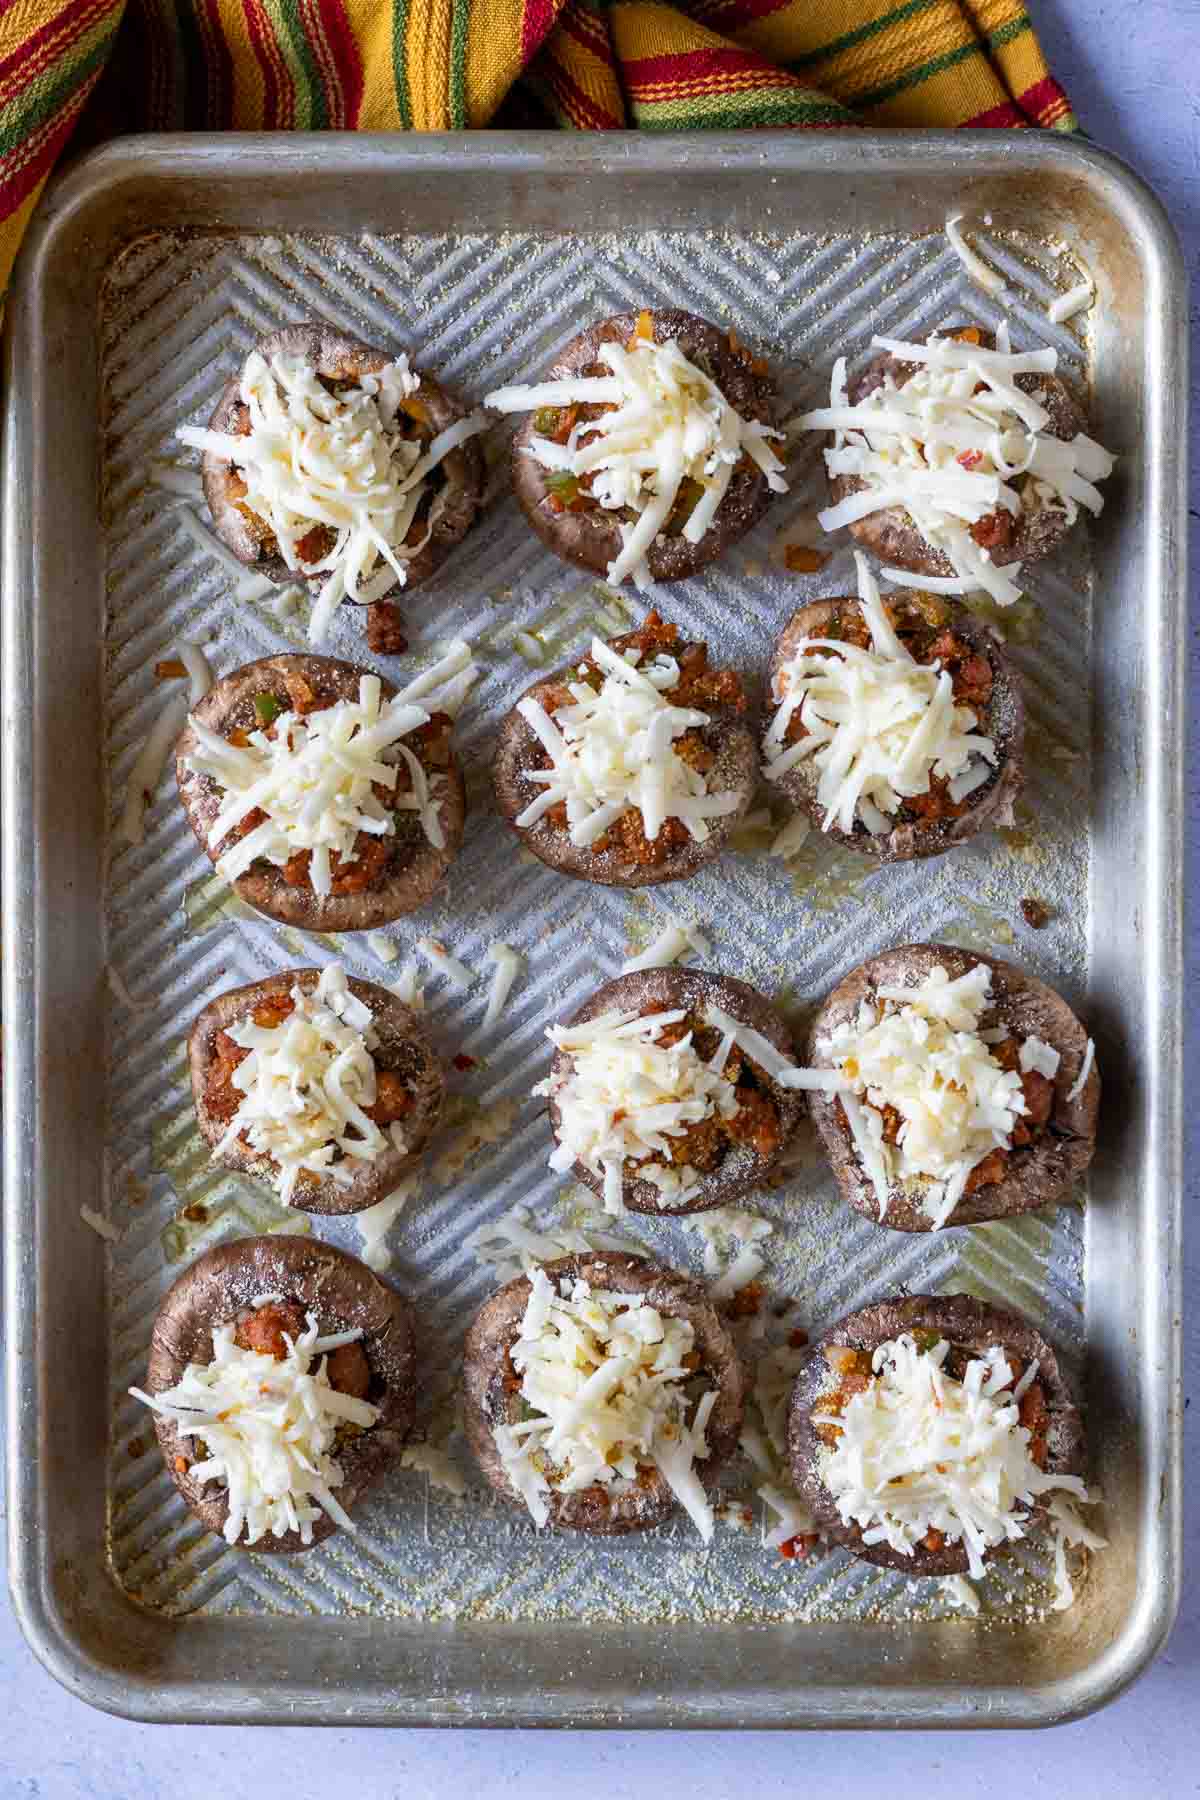 Chorizo stuffed muchrooms on a baking sheet with shredded cheese topping.